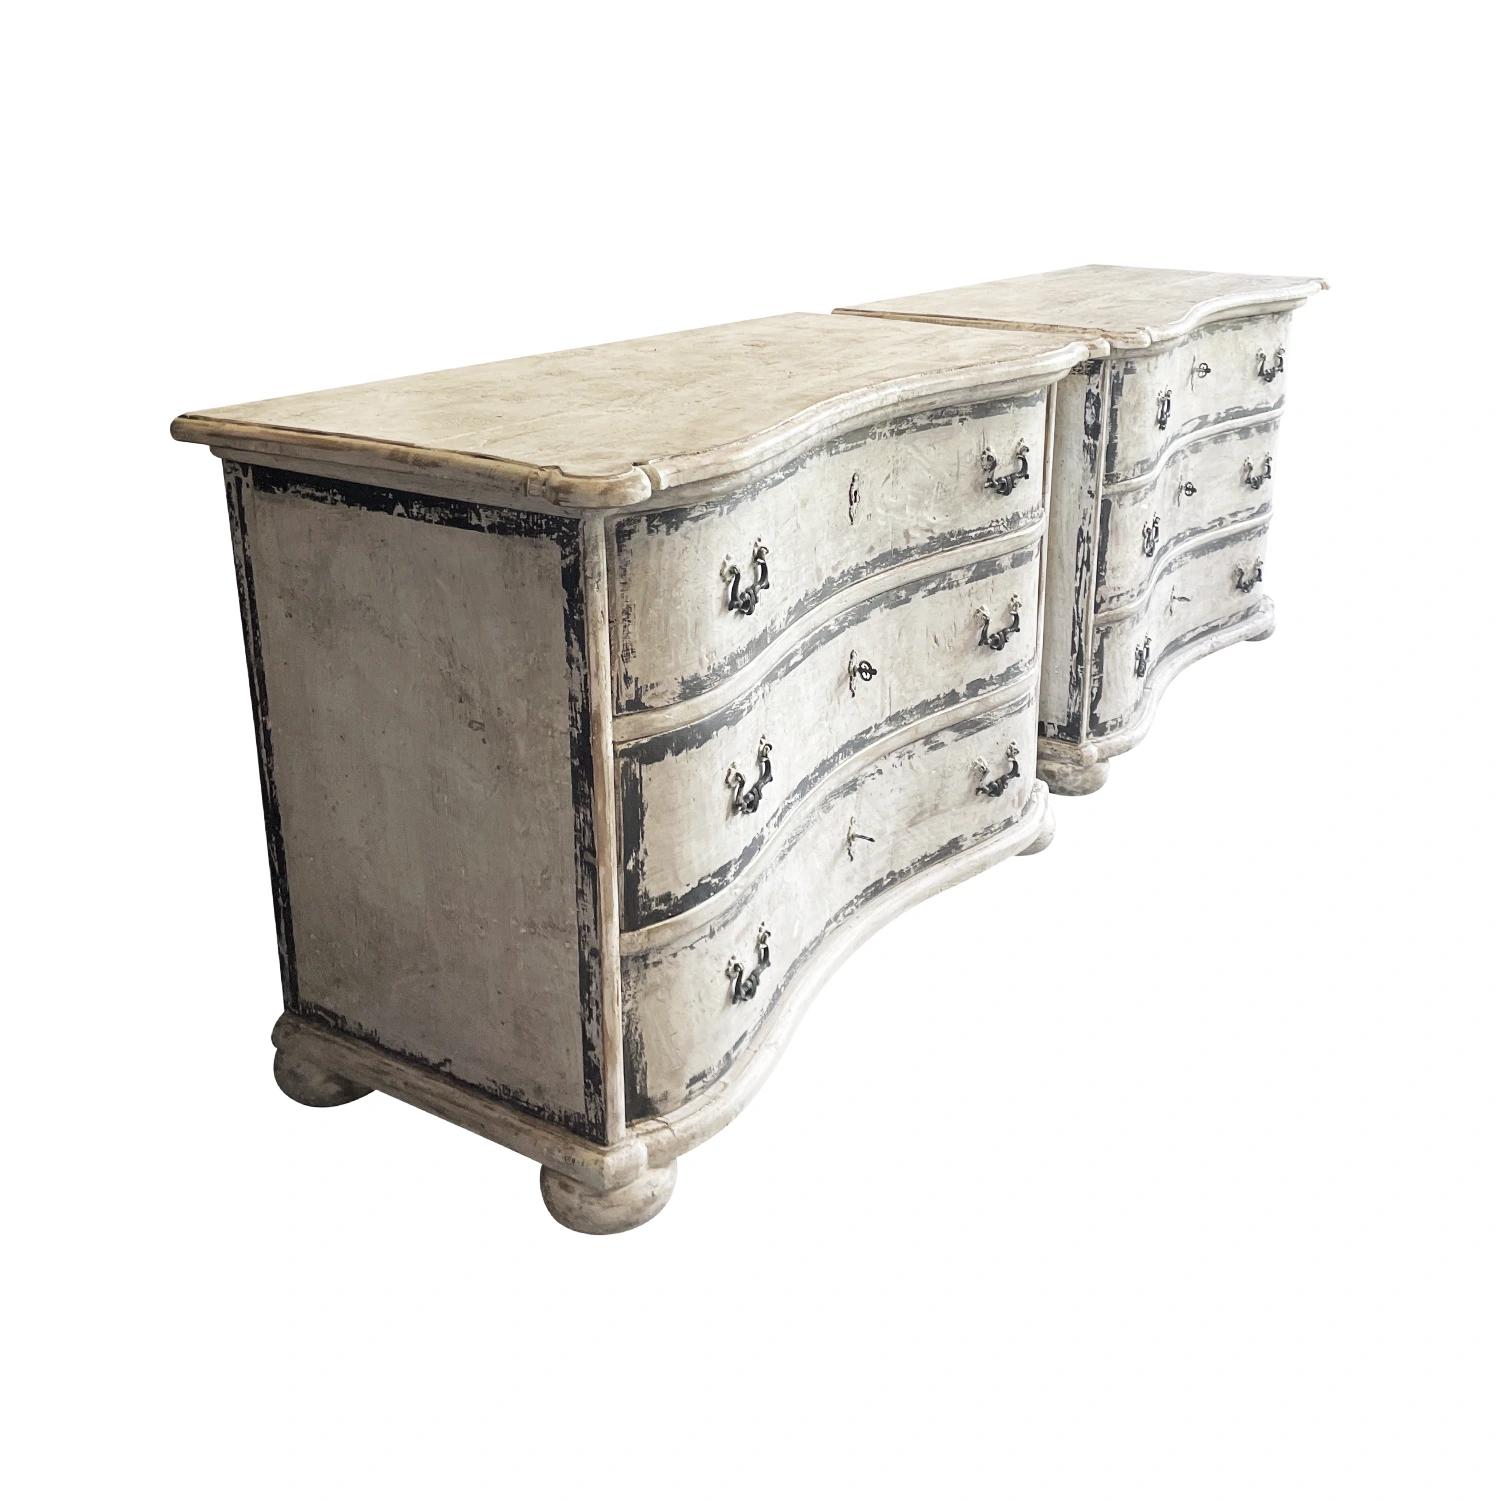 An antique French pair of Provencal chests of drawers or commodes made of hand crafted Pinewood with bowed fronts and an ecru color aged patina, in good condition. The painted commodes have a slightly raised rectangular tops with round corners. The